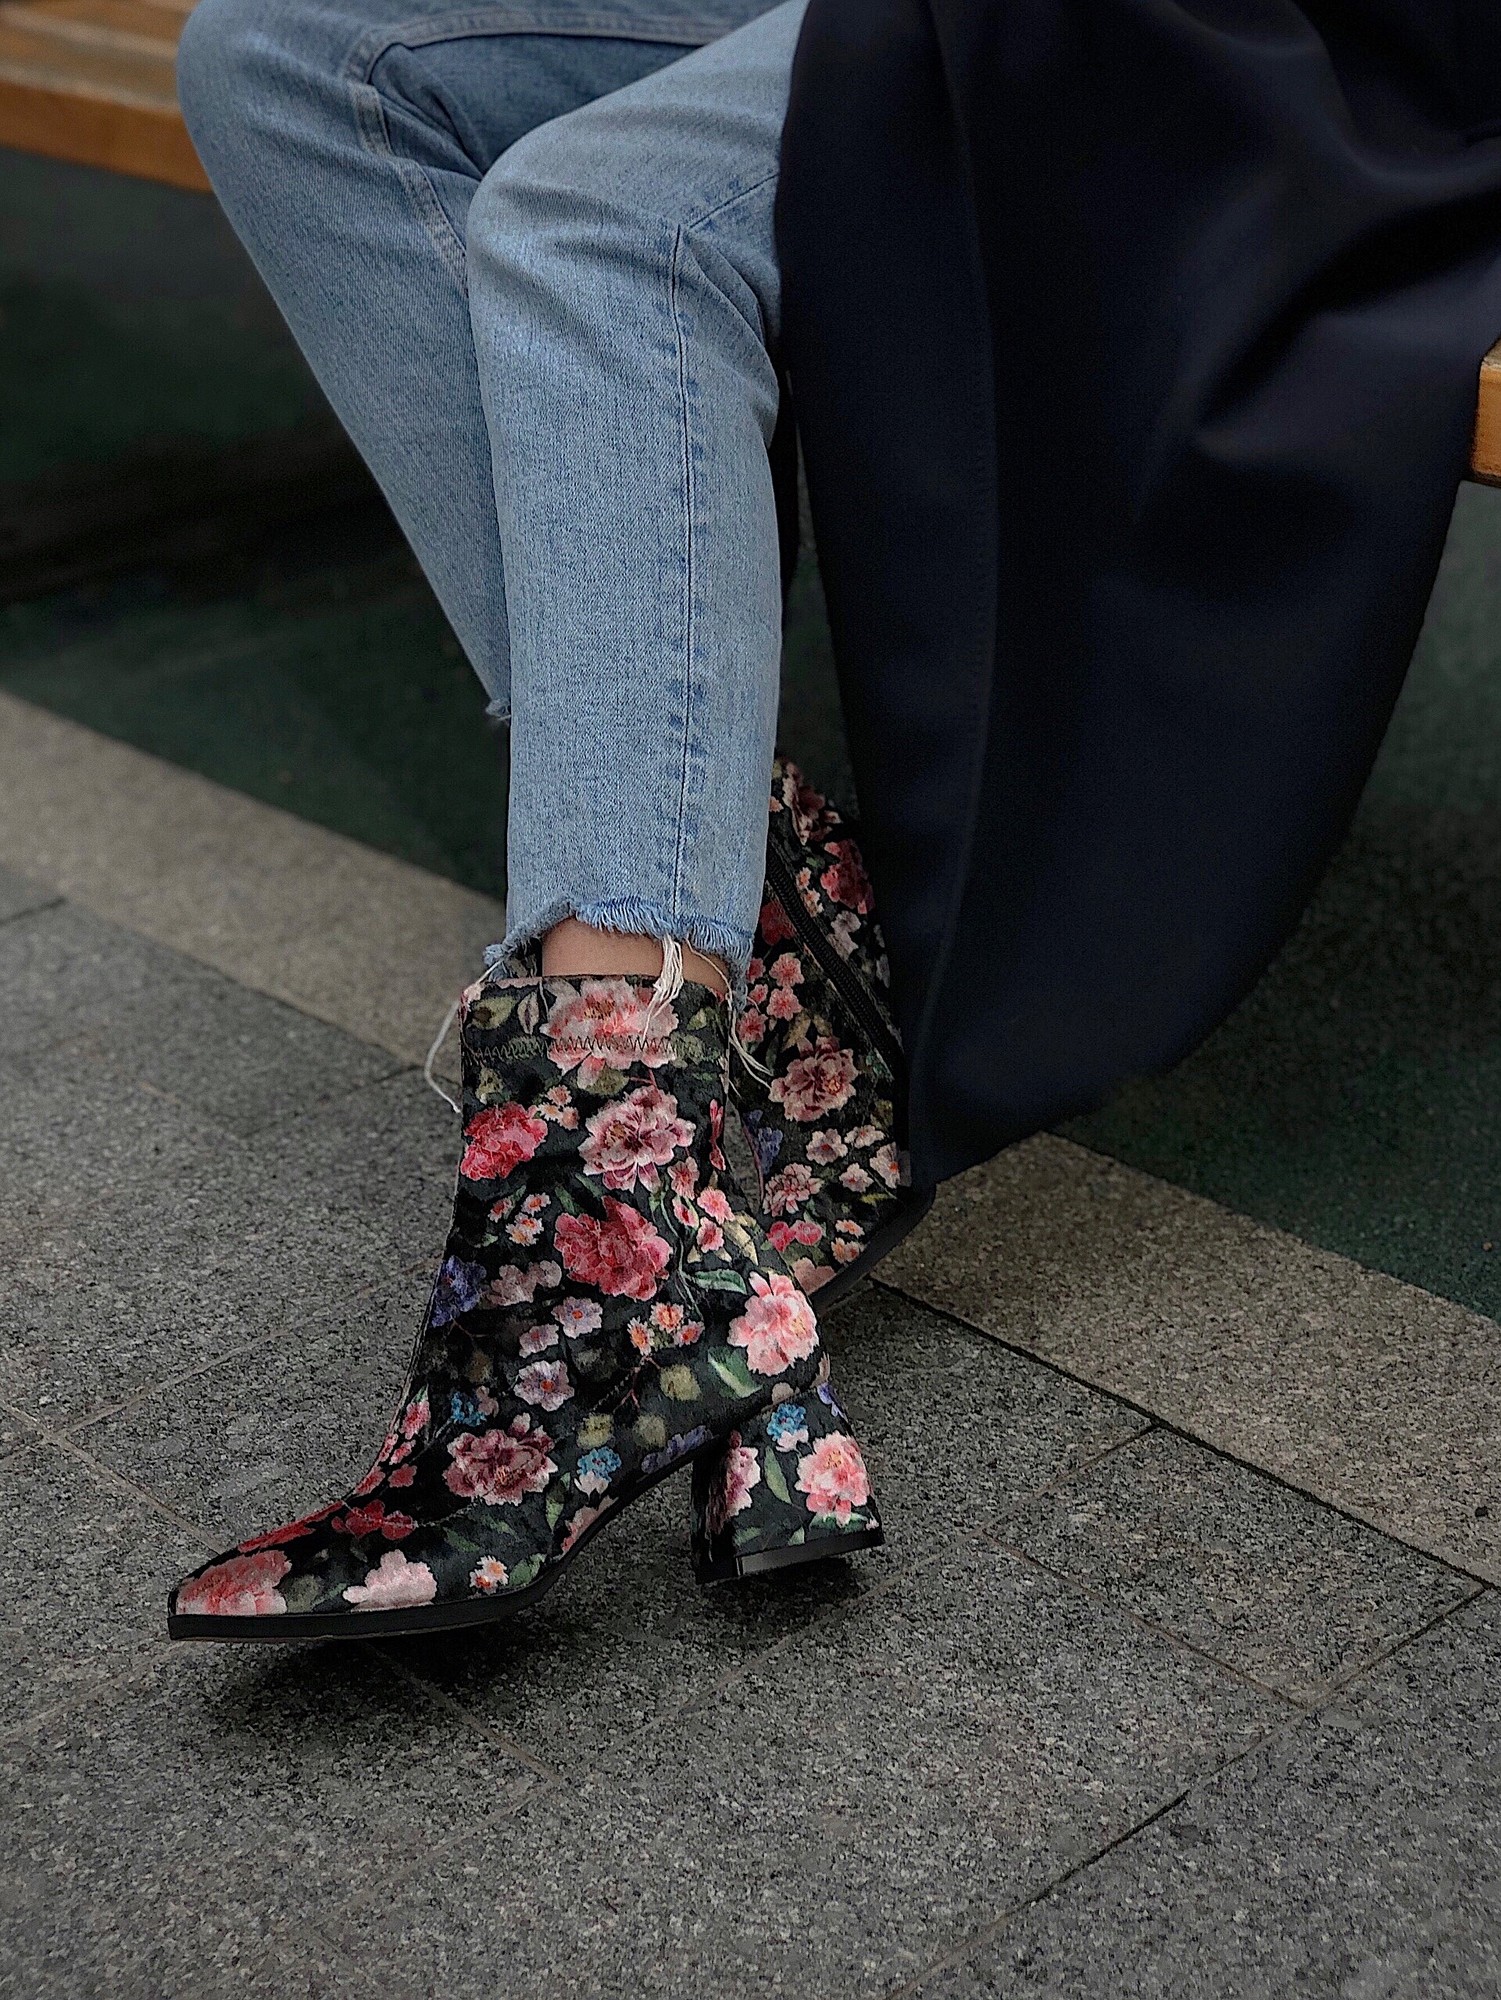 Demi-season ankle boots with flower print